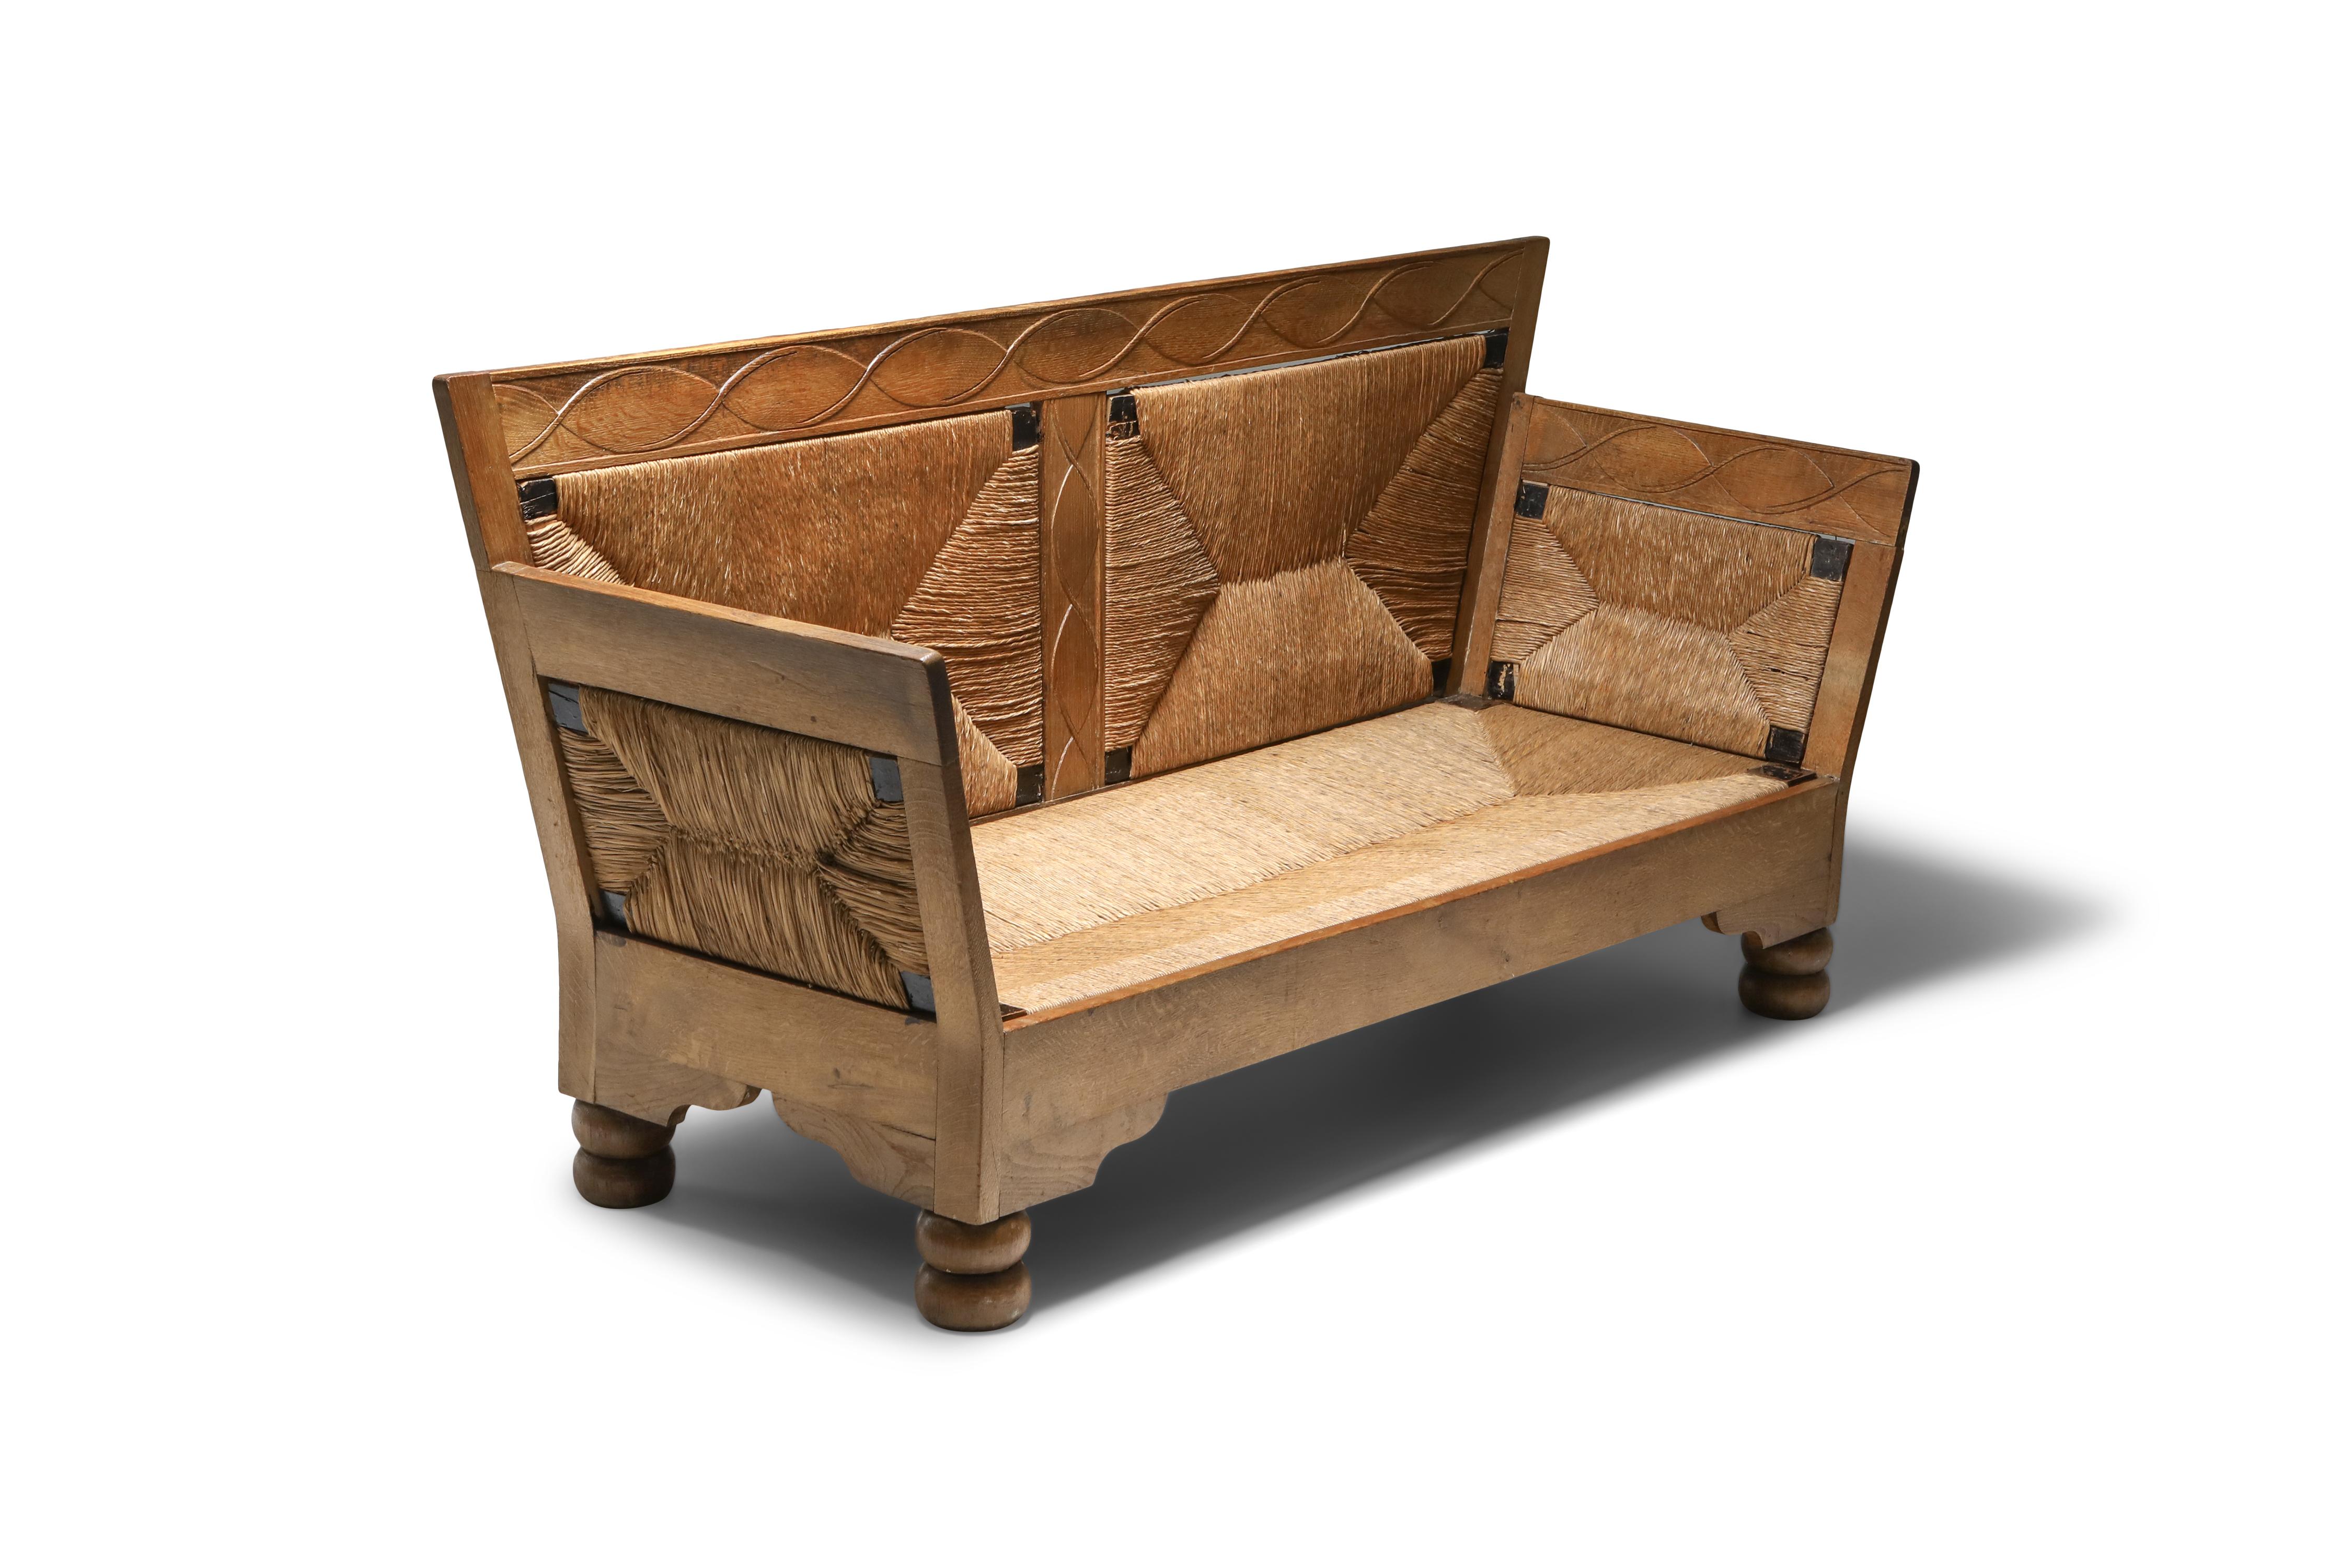 Naturalist wabi sabi piece 
Early 20th century sofa from Scandinavia
Fits well in a rustic modern interior inspired by Axel Vervoordt
Wouldn't look too bad in a more evocative Kelly Wearstler decor either.